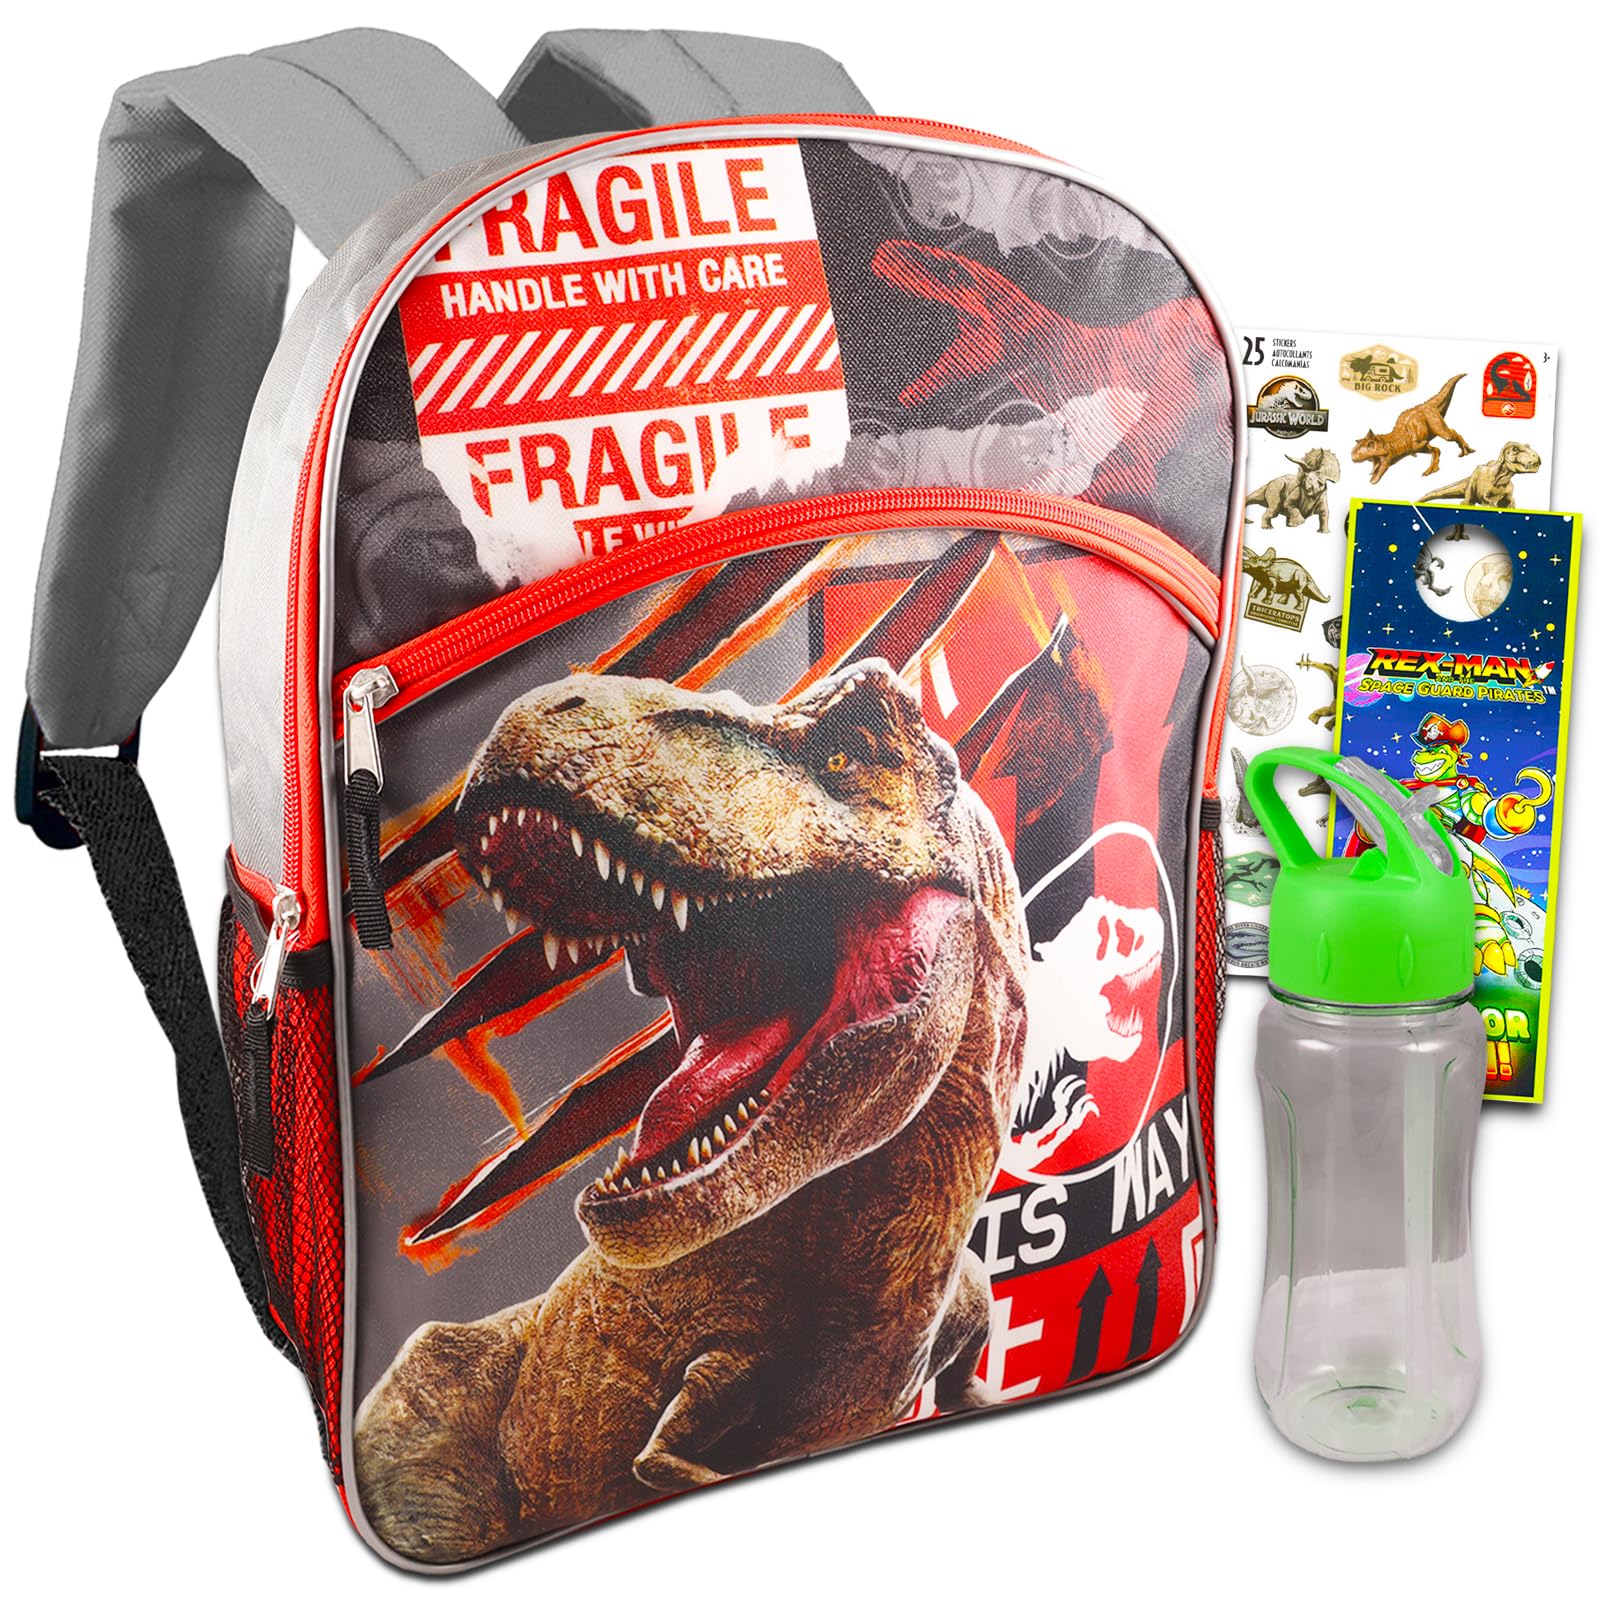 Jurassic World Backpack for Kids, Toddlers - Jurassic Park School Supplies Bundle with 16” T-Rex School Bag Plus Stickers, Water Pouch, and More (Dinosaur Travel Bag)